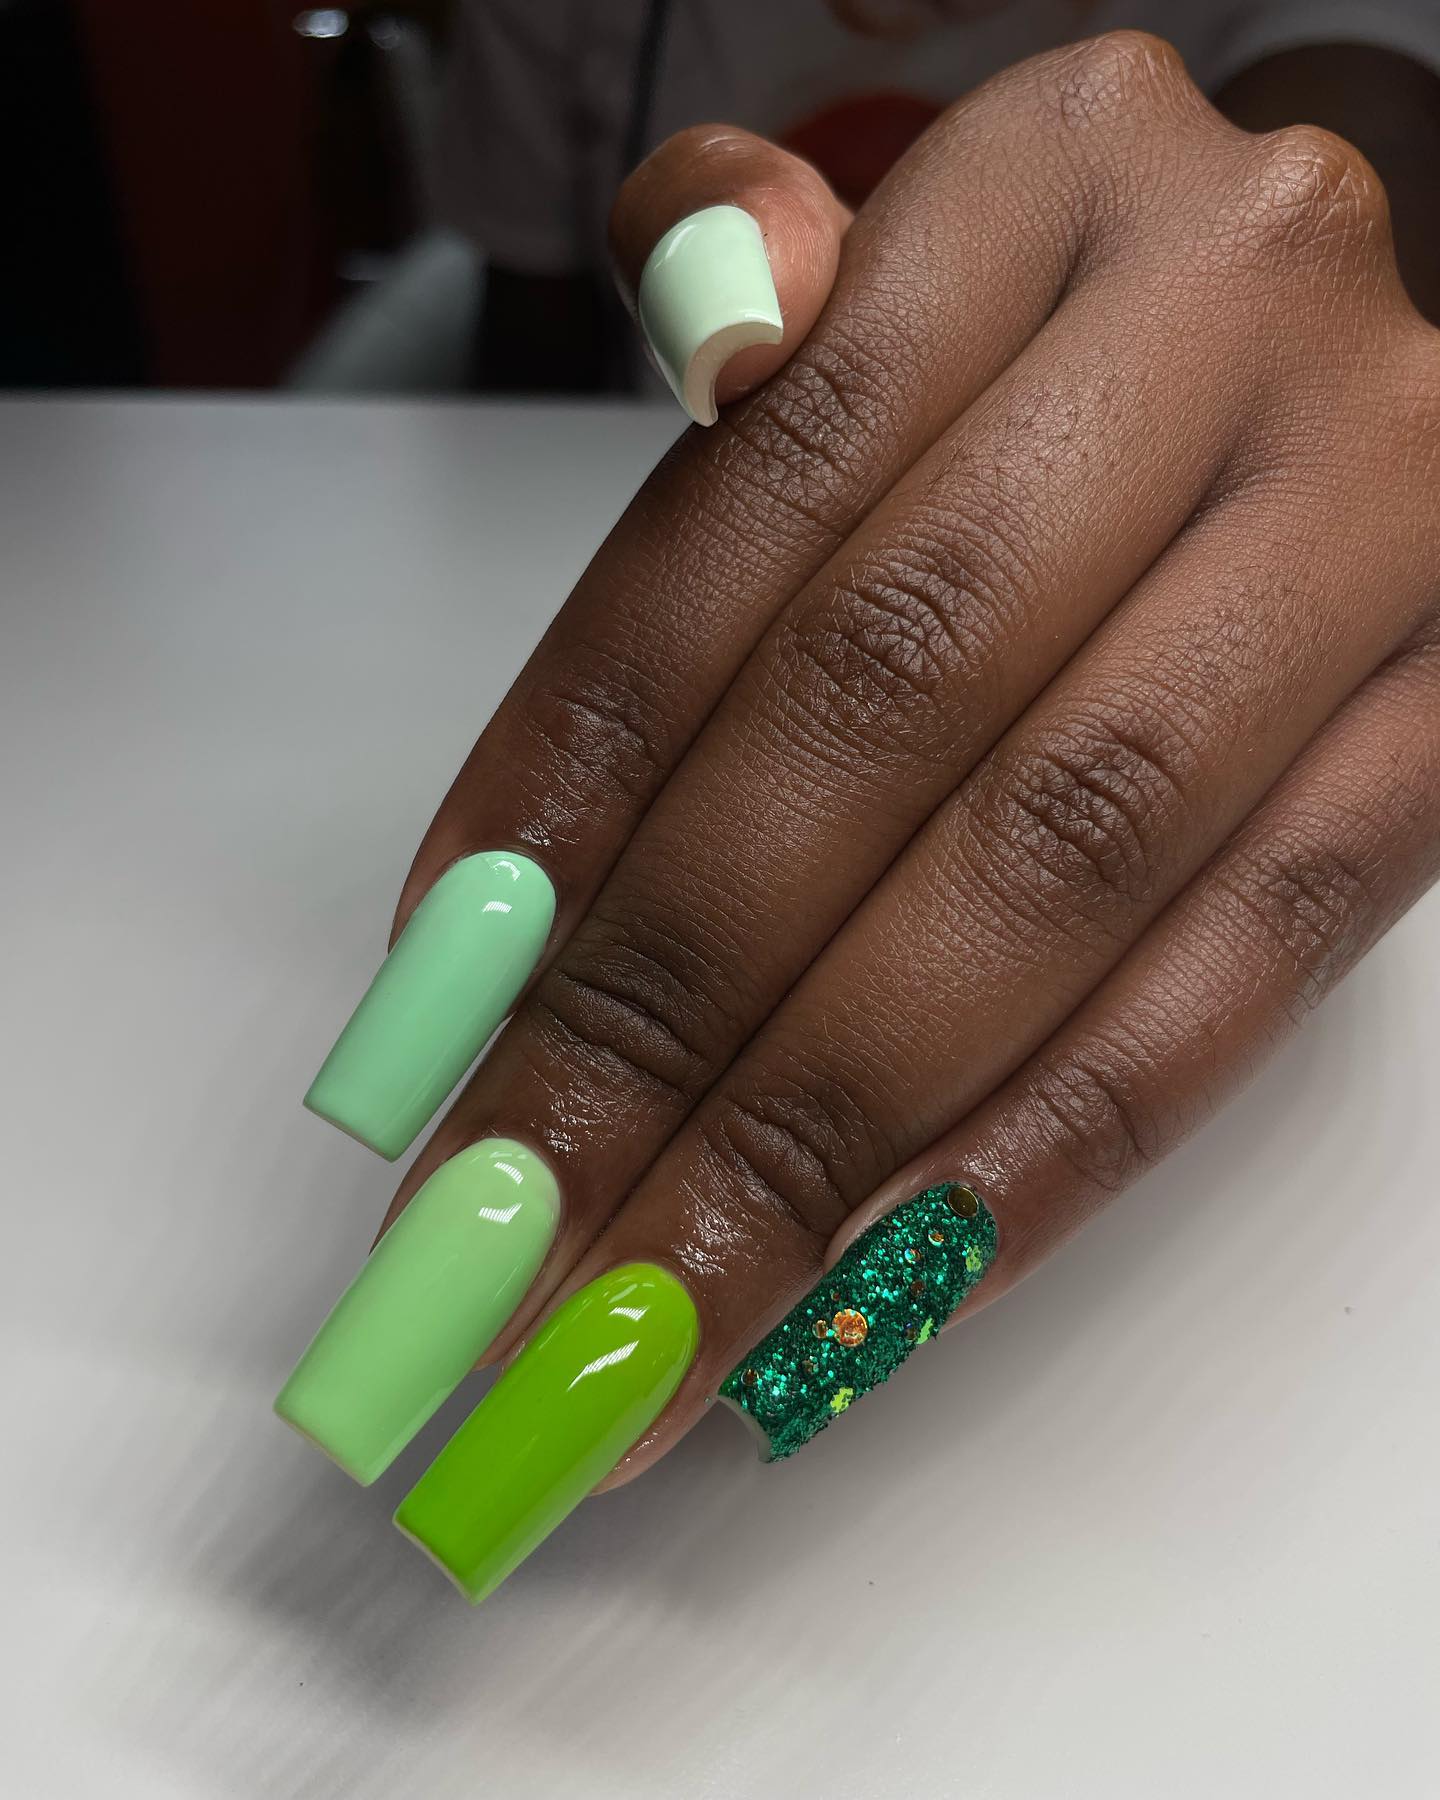 A lot of women are indecisive and you are right actually. When there are so many great options, who can choose one easily? That's why, you can use different shades of green and glittered one in your nails together.